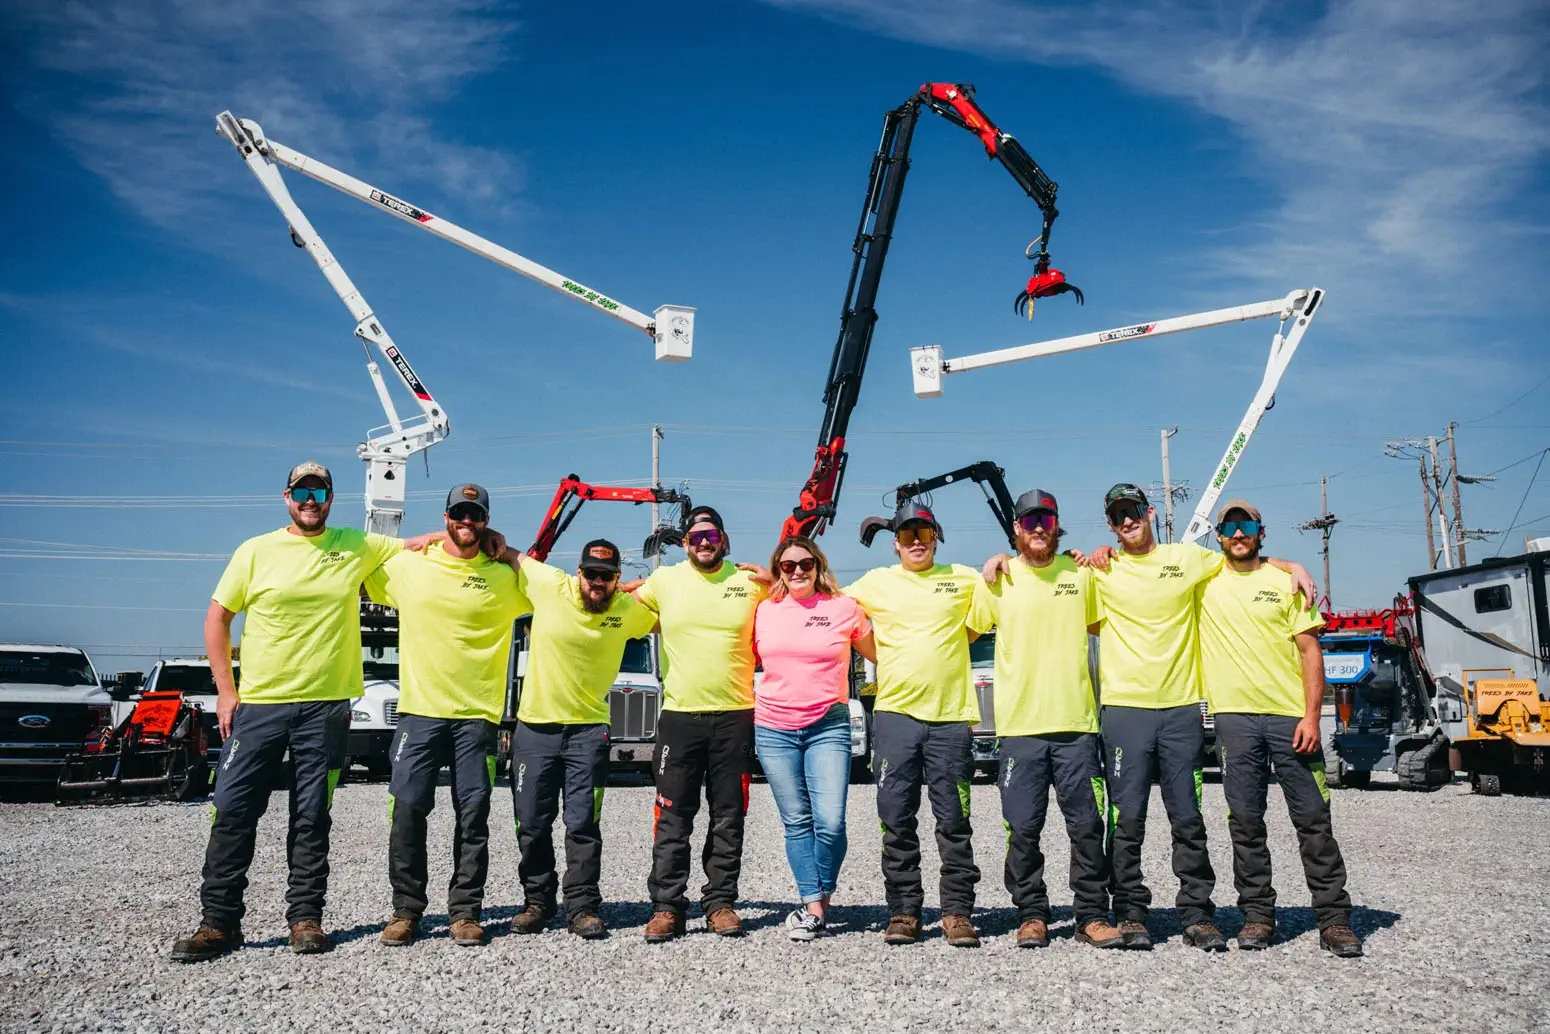 A group of nine people, wearing bright color shirts, stand side by side in front of large construction equipment under a clear, blue sky.